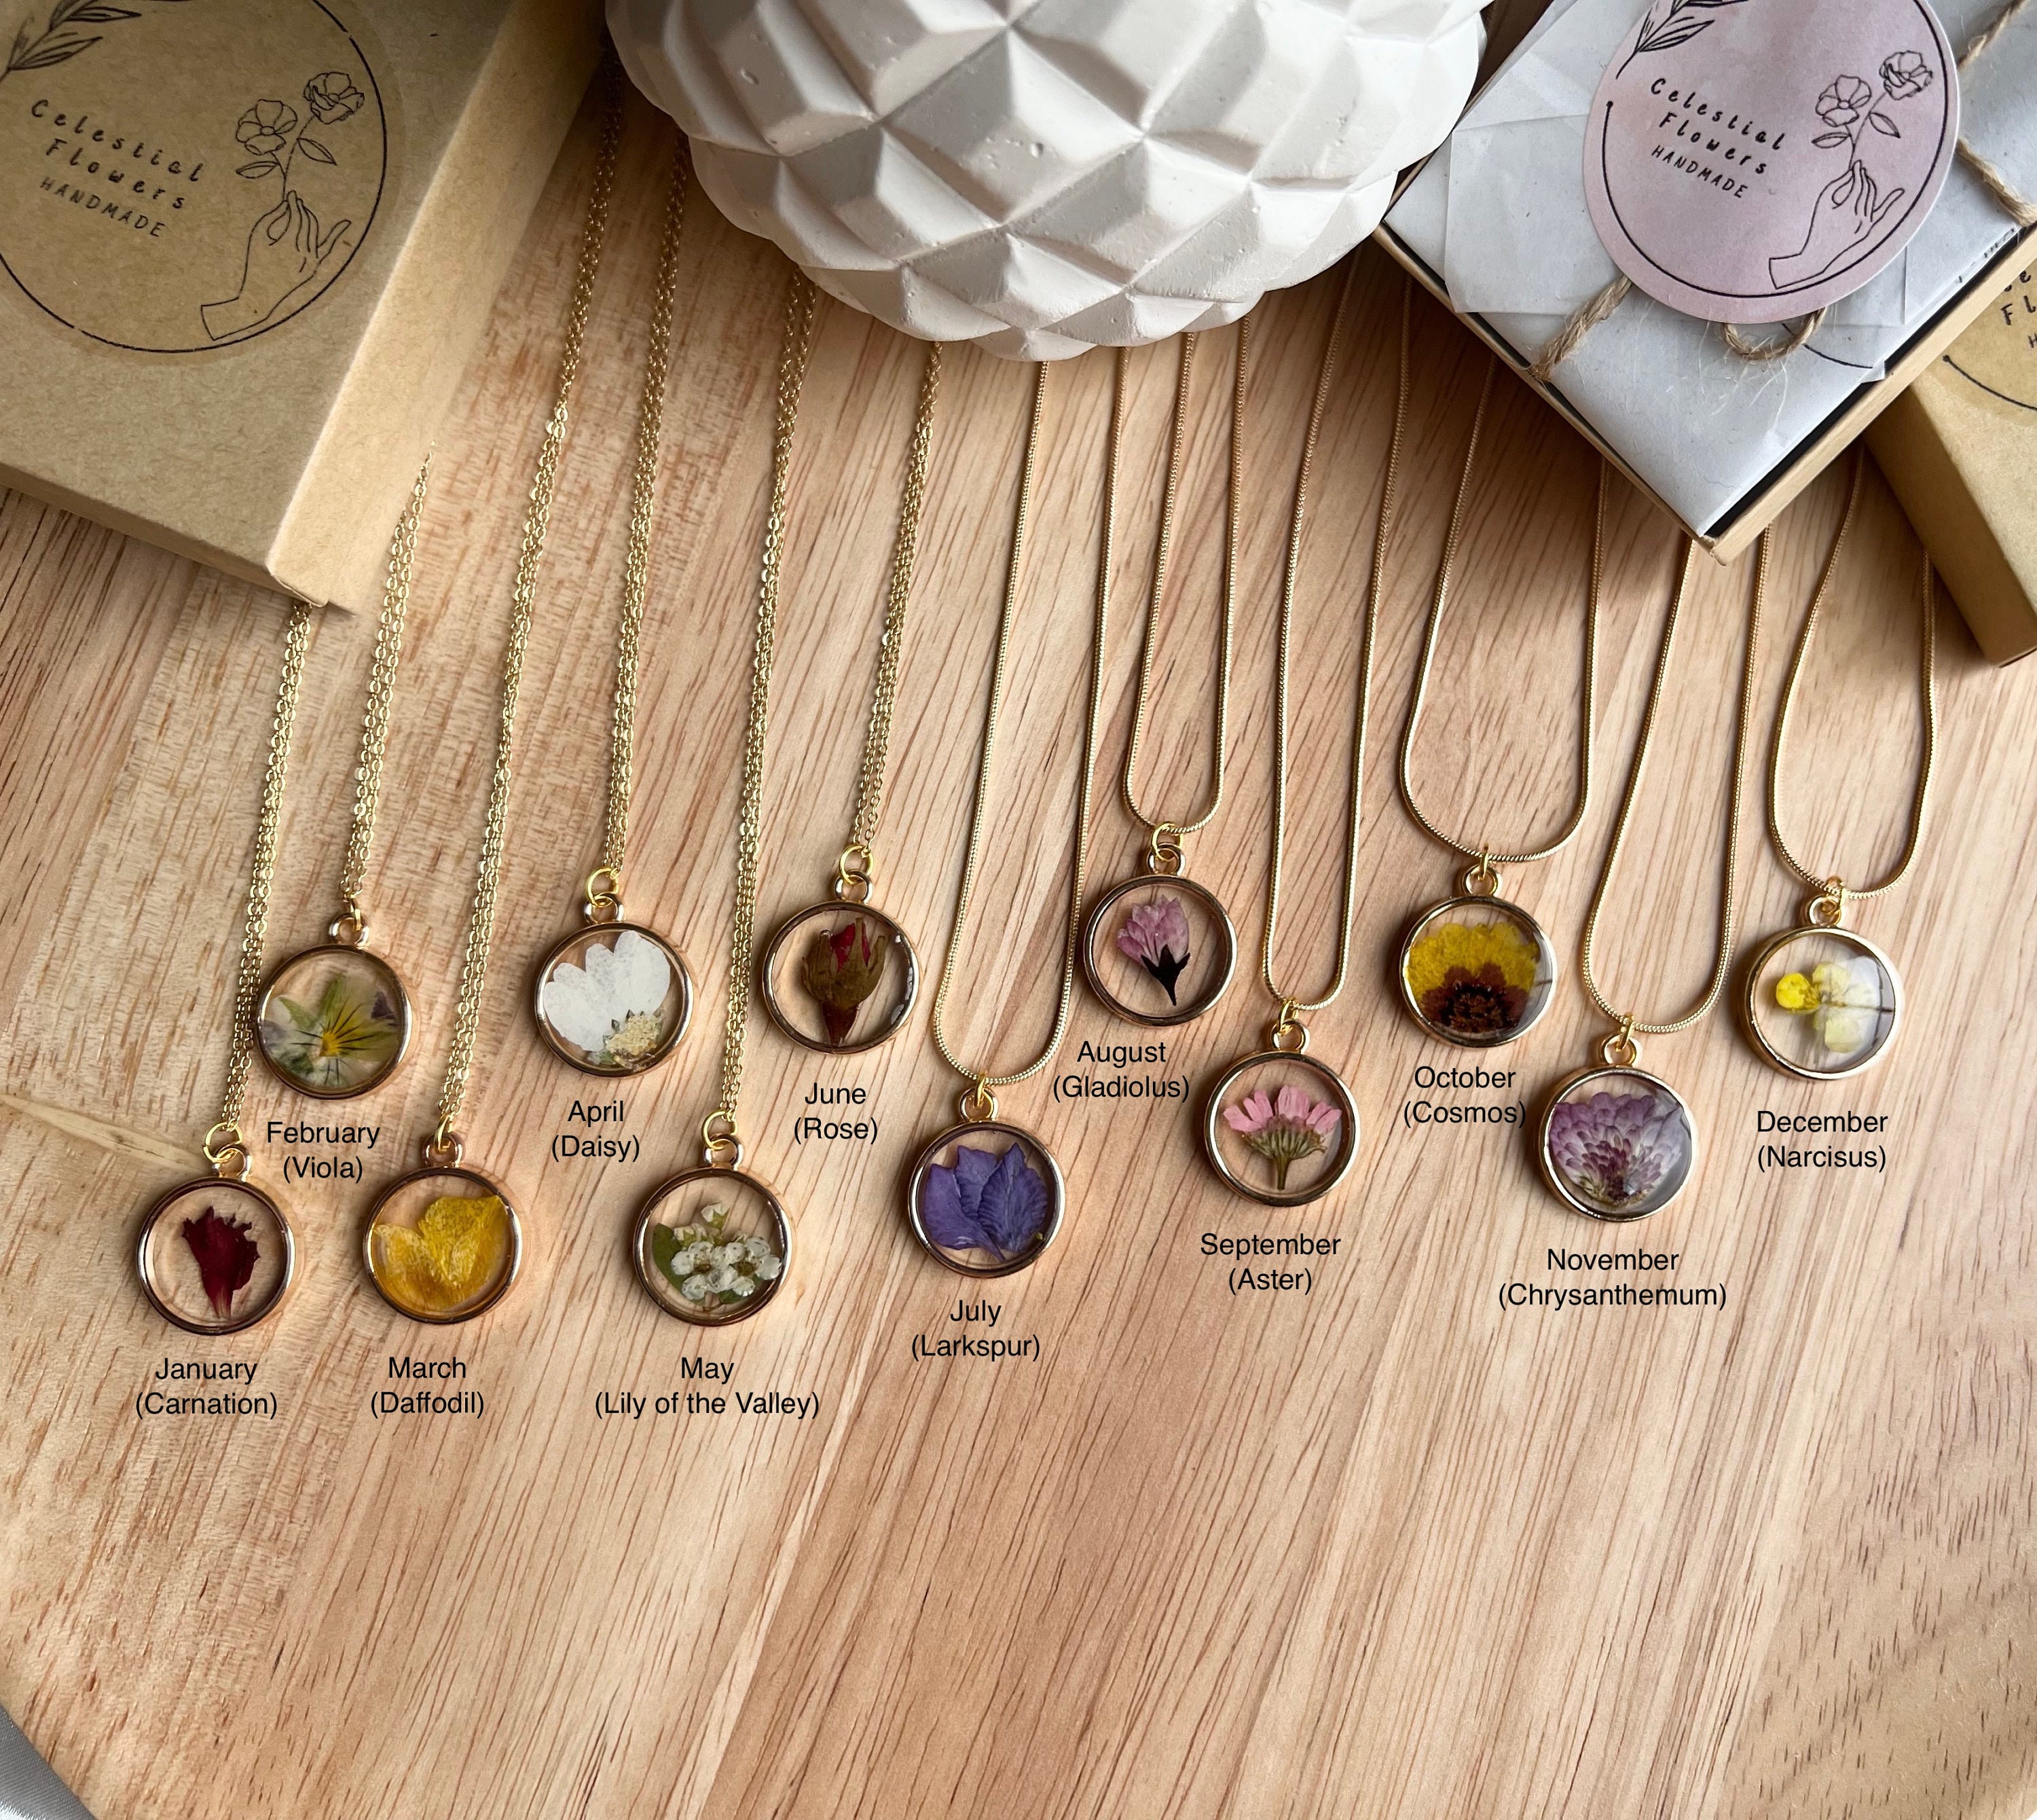 Small dried flowers necklace Handmade resin jewelry – Smile with